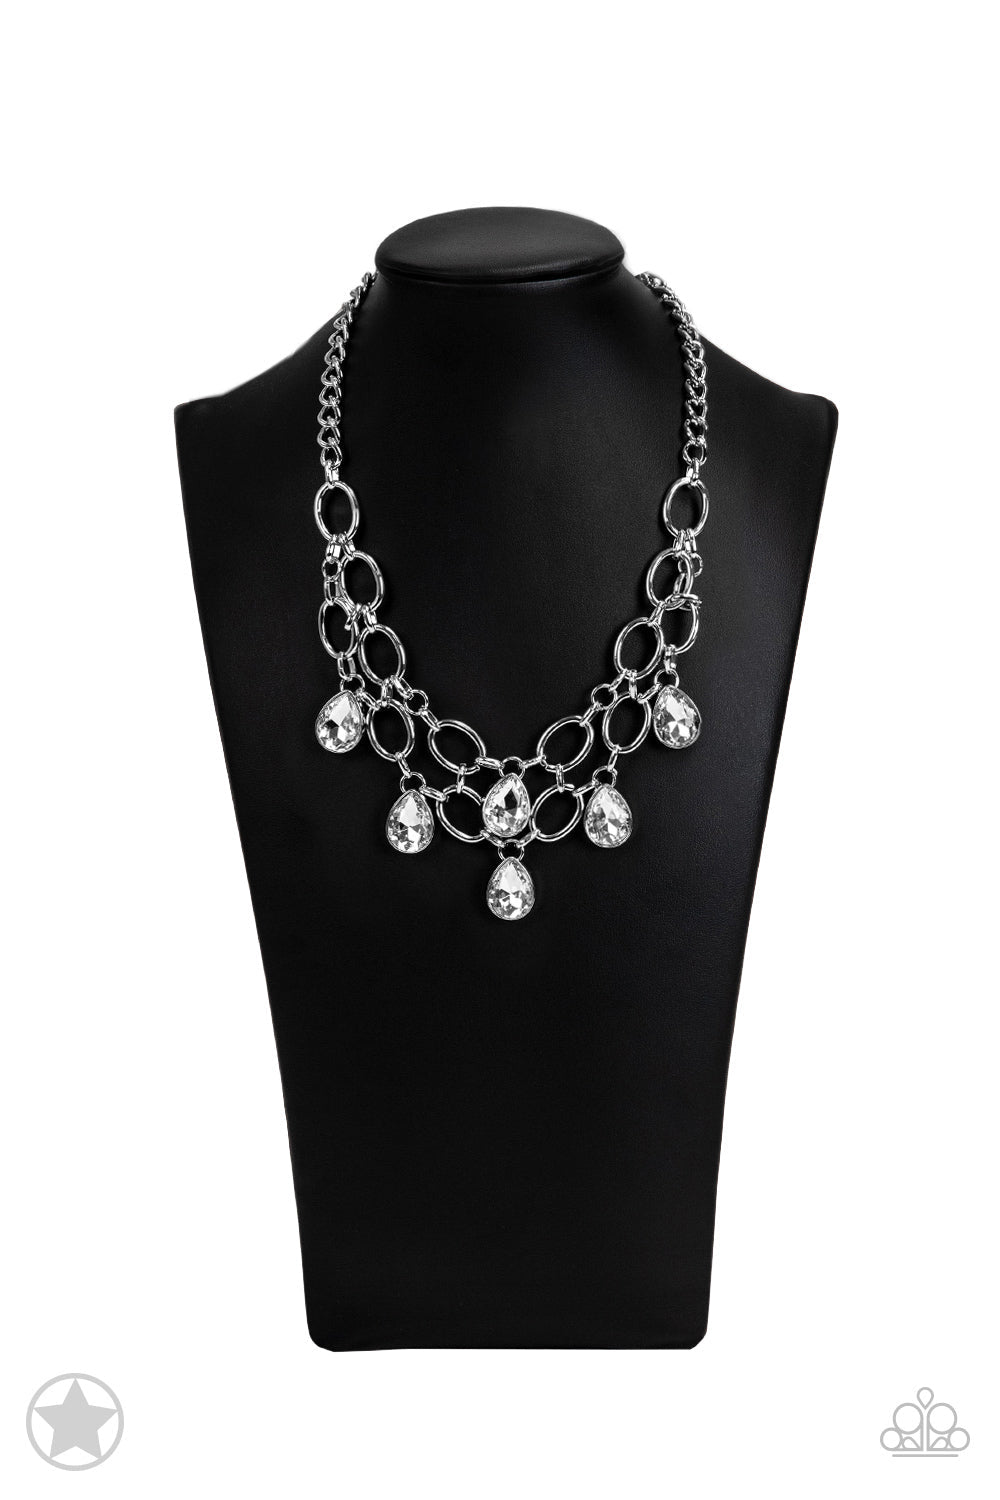 Show - Stopping Shimmer - Gem Silver Fashion Necklace - Paparazzi Jewelry - Bejeweled Accessories By Kristie - Two rows of silver chain layer below the collar for a fierce fashion. Glittery white teardrops gems hang from the glistening layers for a timeless shimmer to the show-stopping statement style. Necklace has an adjustable closure.